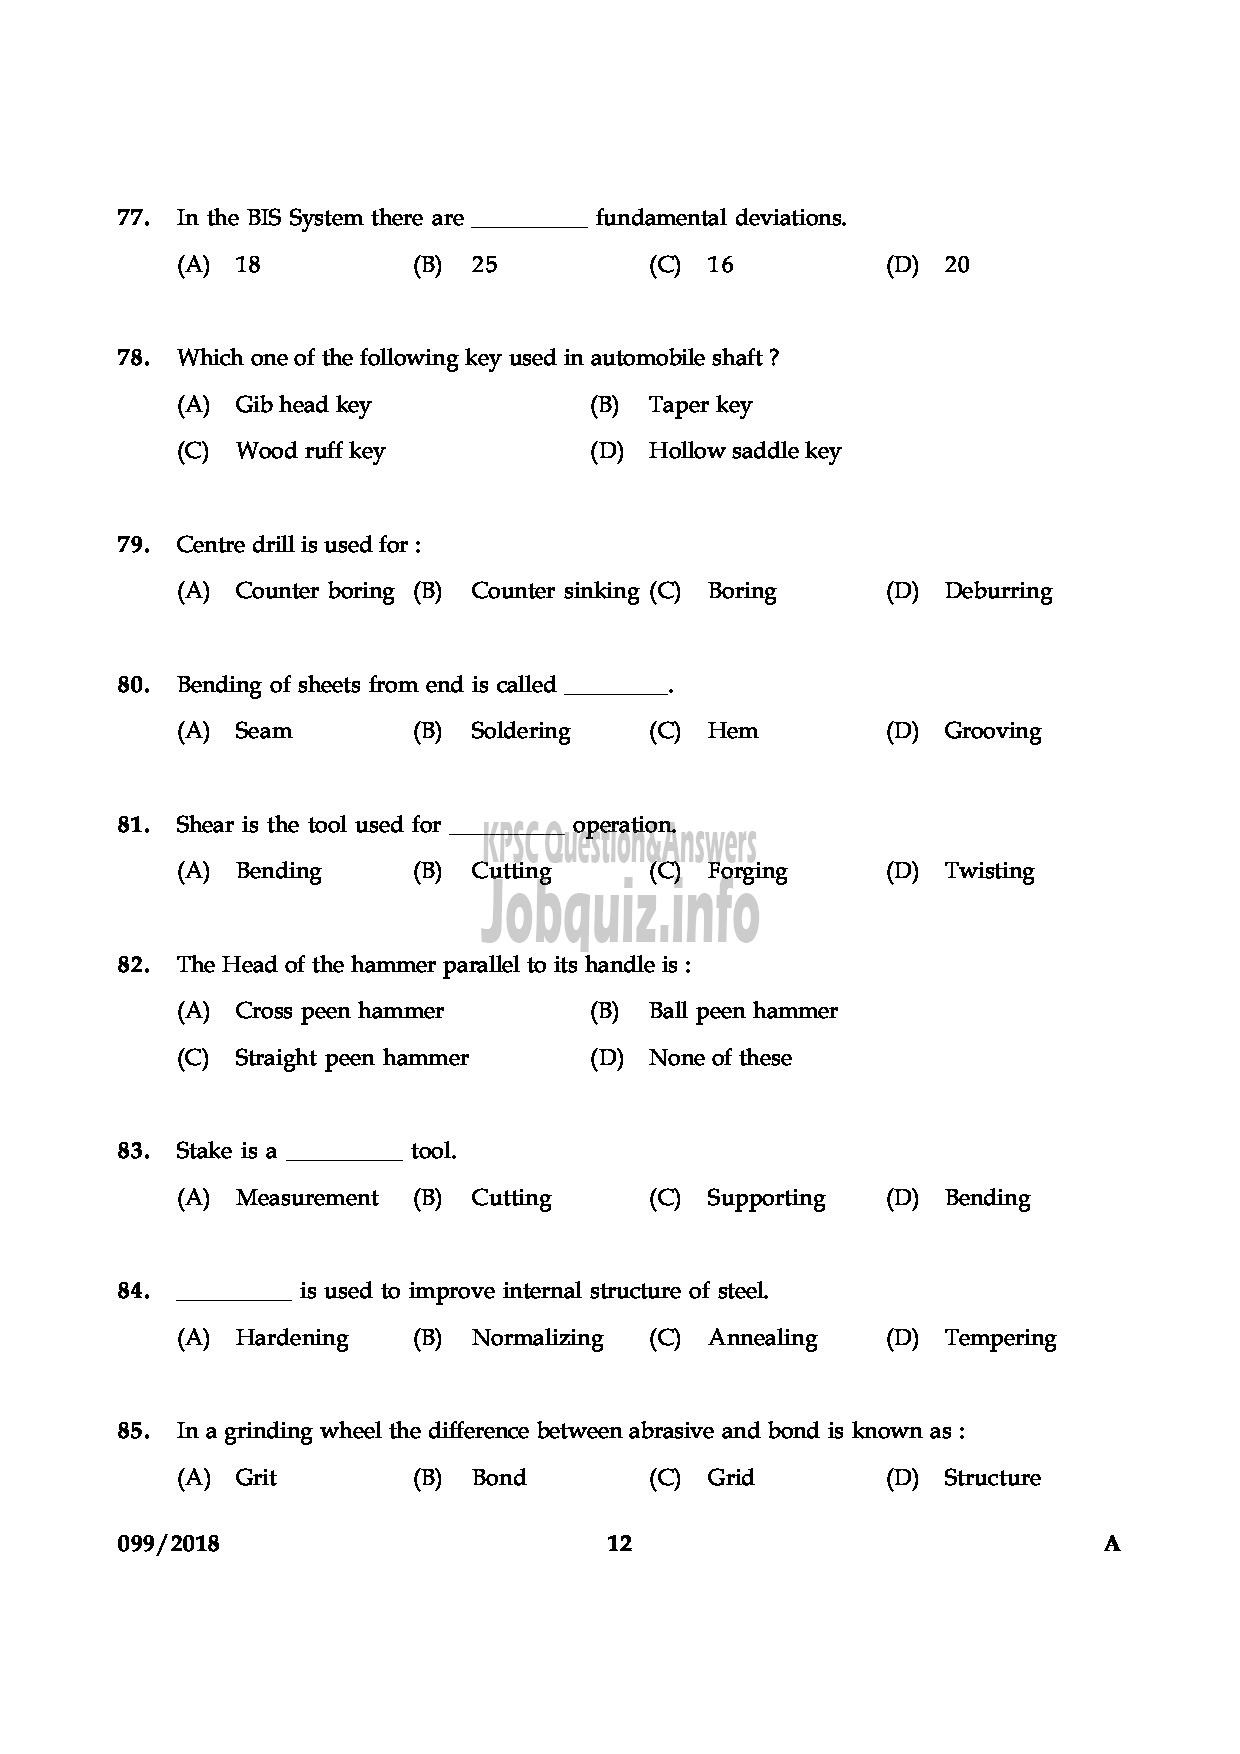 Kerala PSC Question Paper - JUNIOR INSTRUCTOR FITTER INDUSTRIAL TRAINING ENGLISH -12